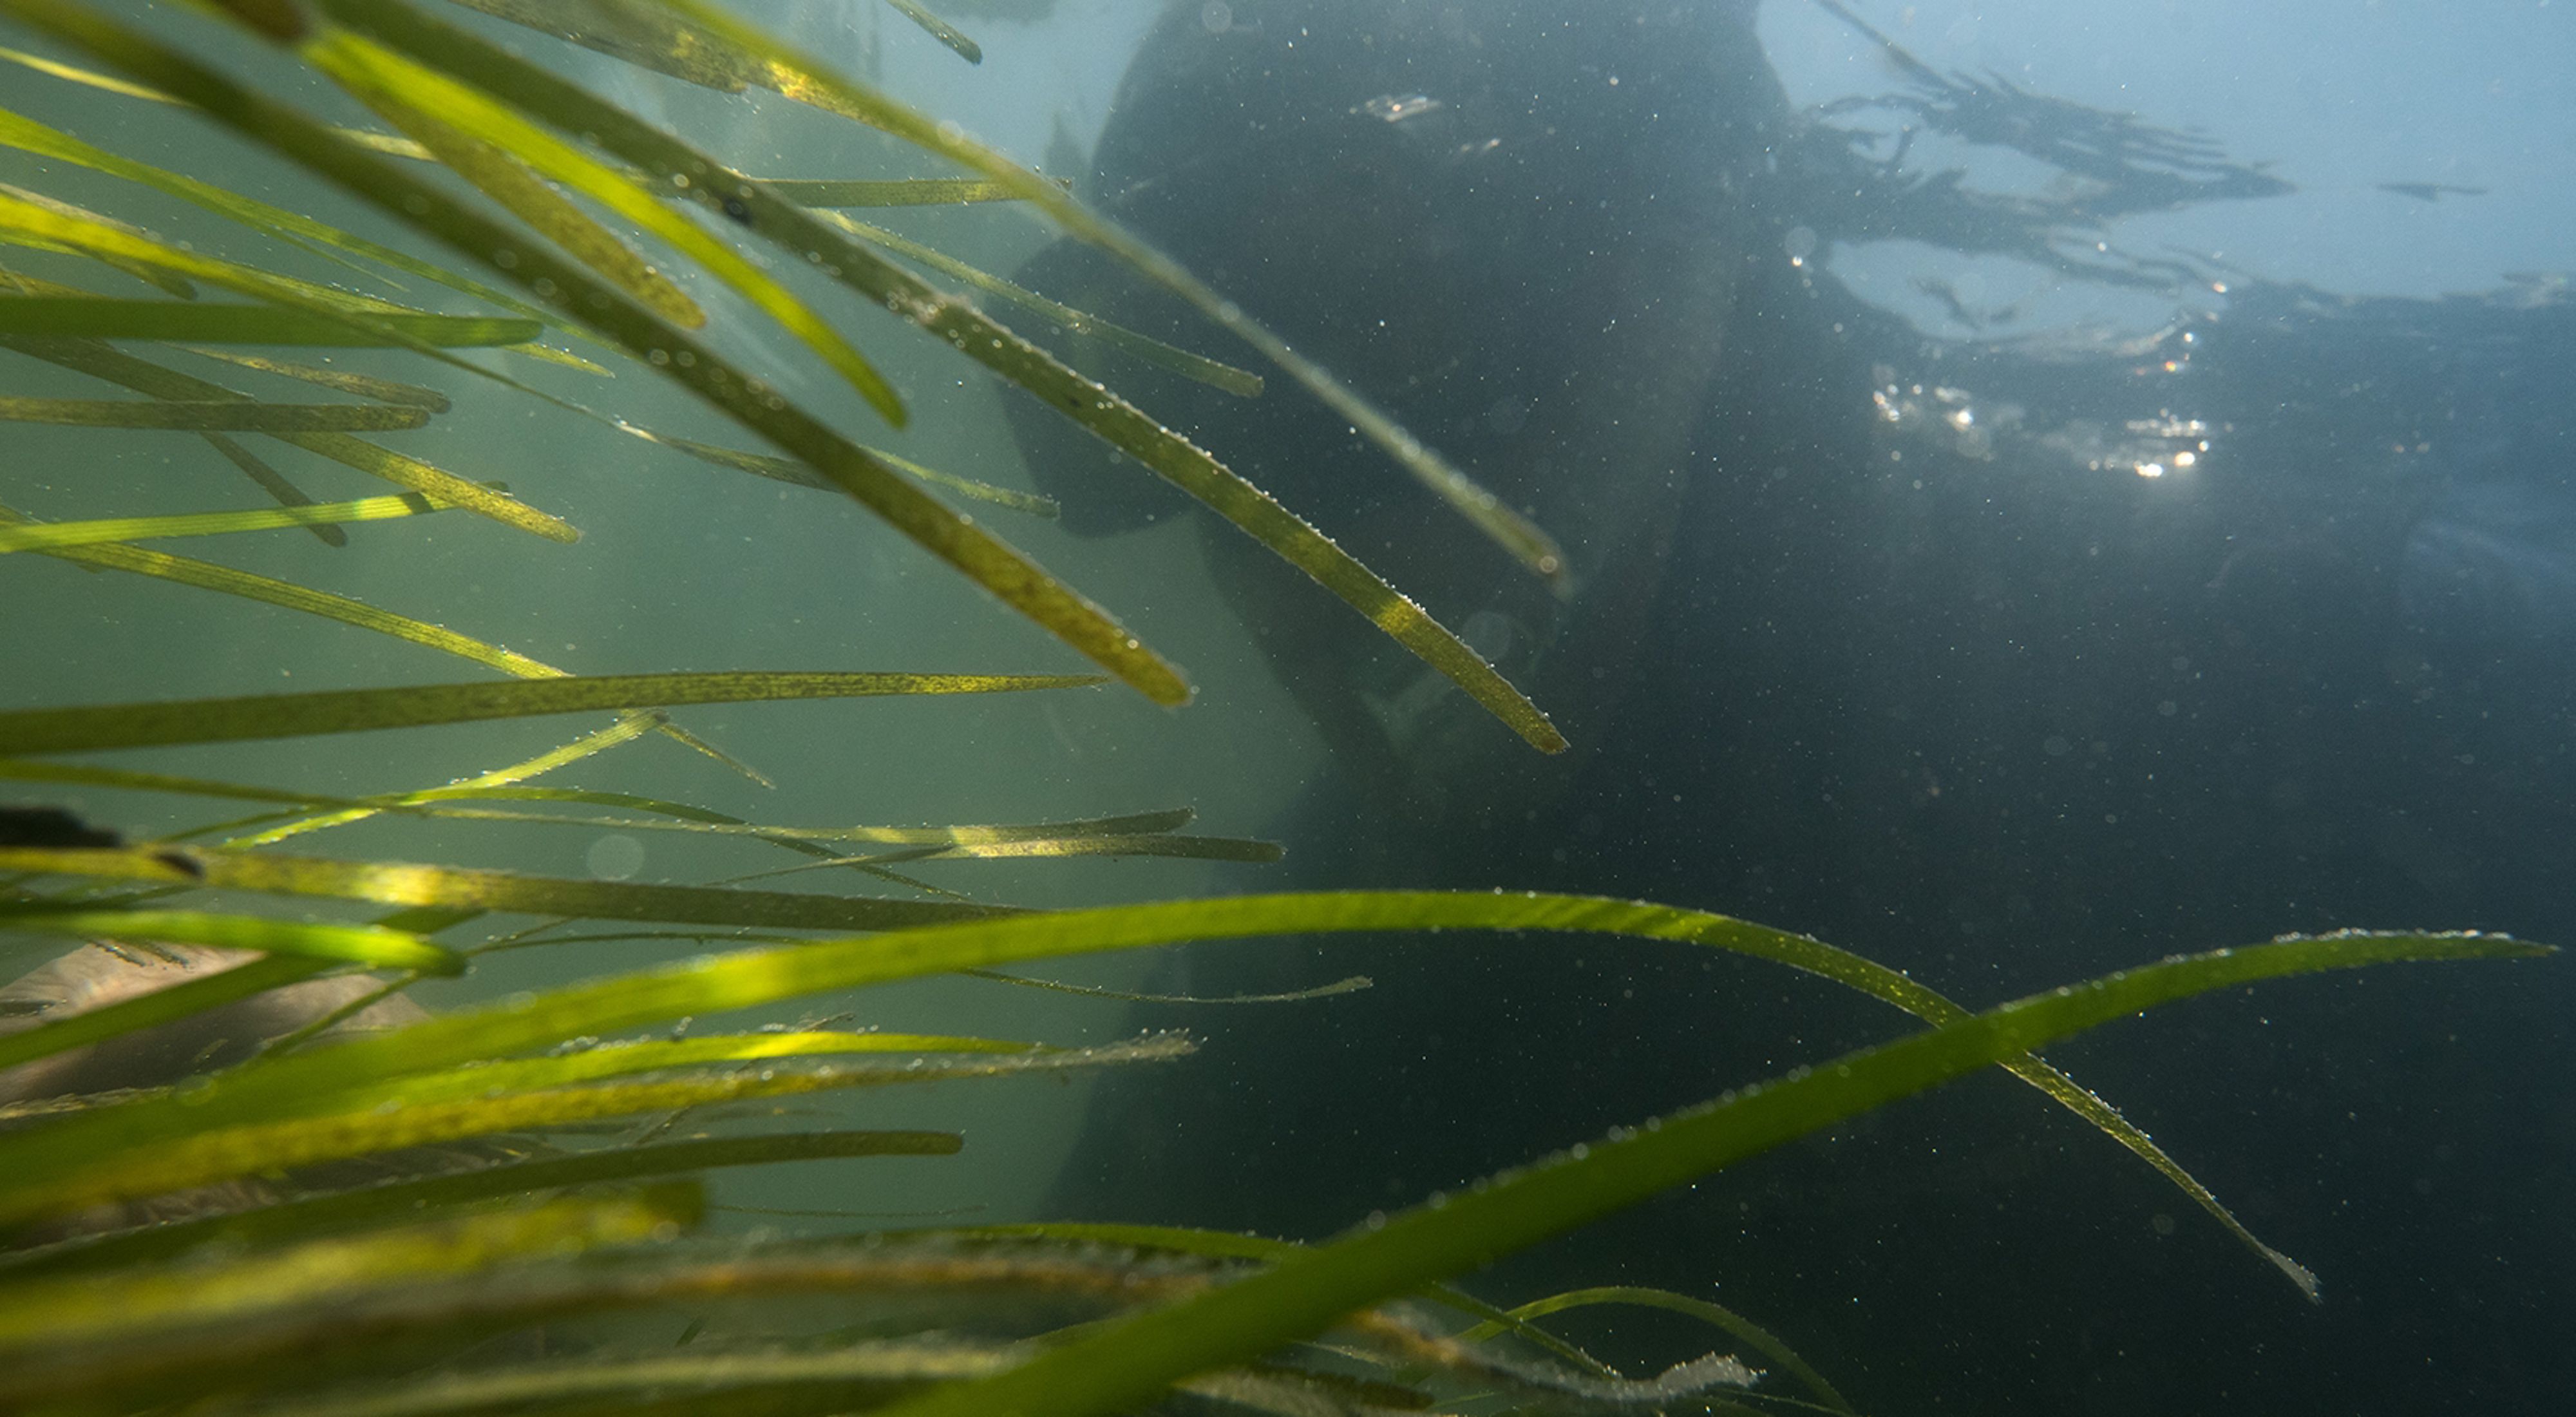 A person snorkels underwater moving through long, floating blades of grass collecting seeds in a coastal eelgrass meadow. 